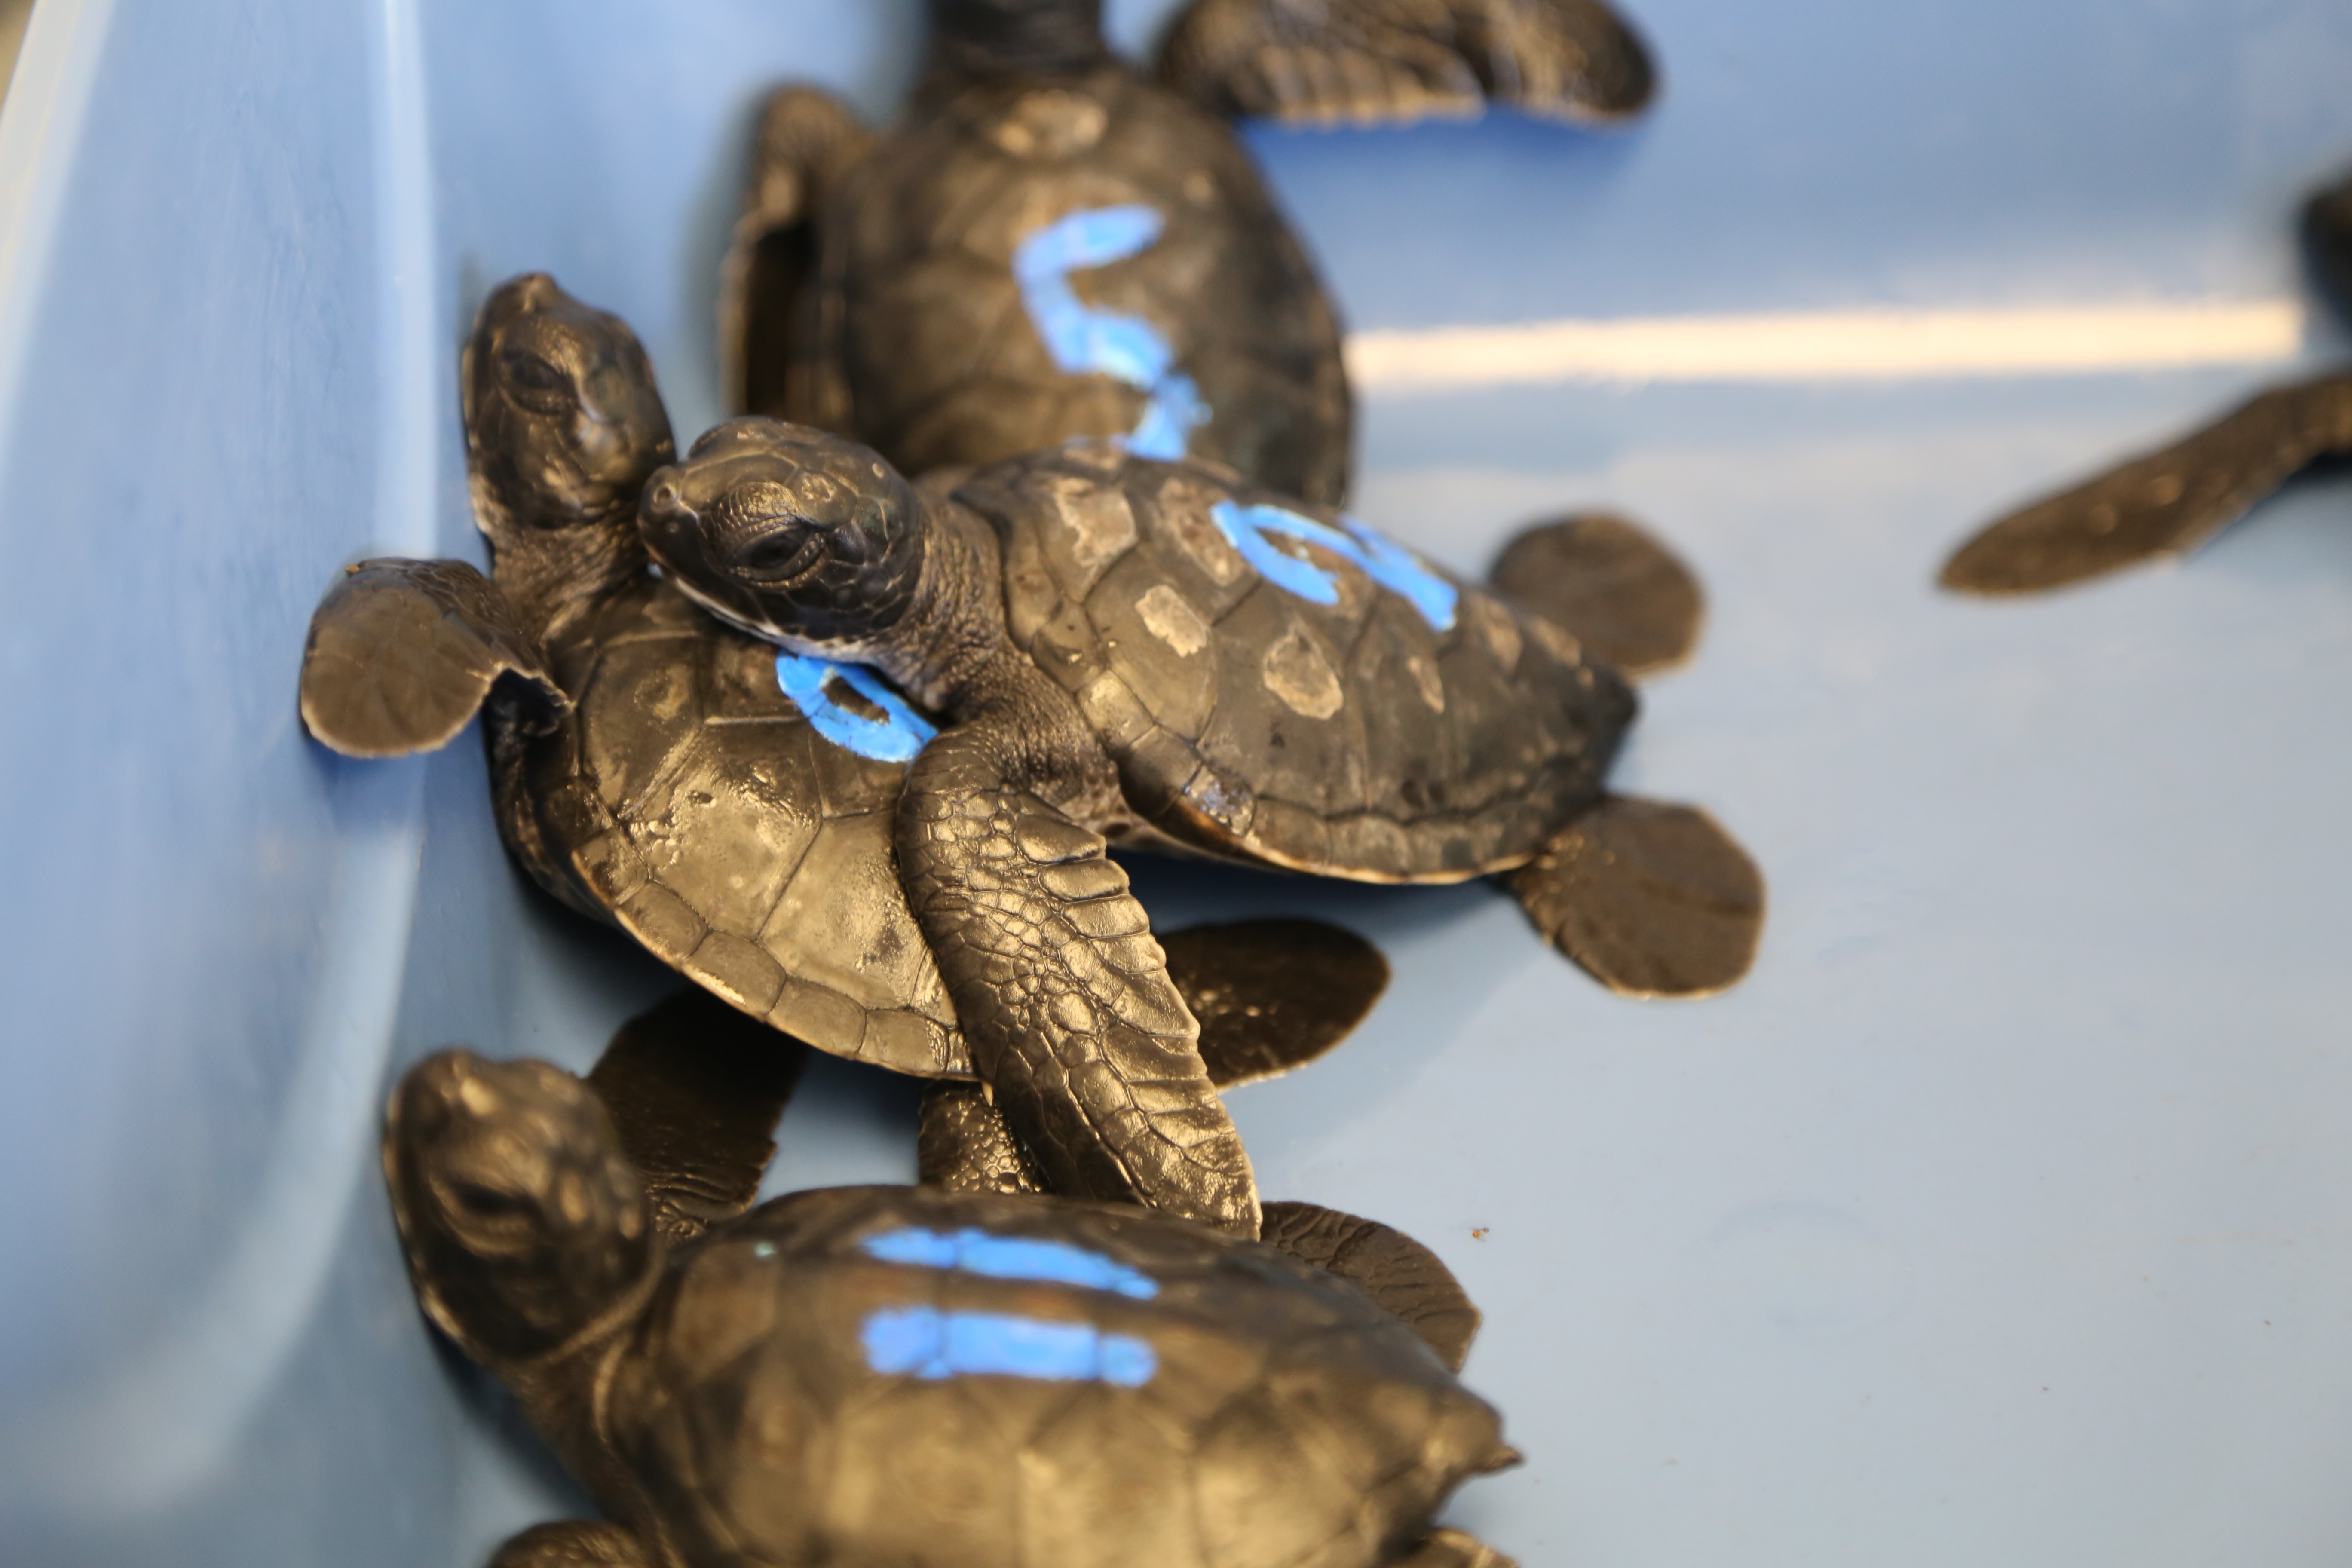 Turtle hatchlings first evaluation at the Maui Ocean Center.